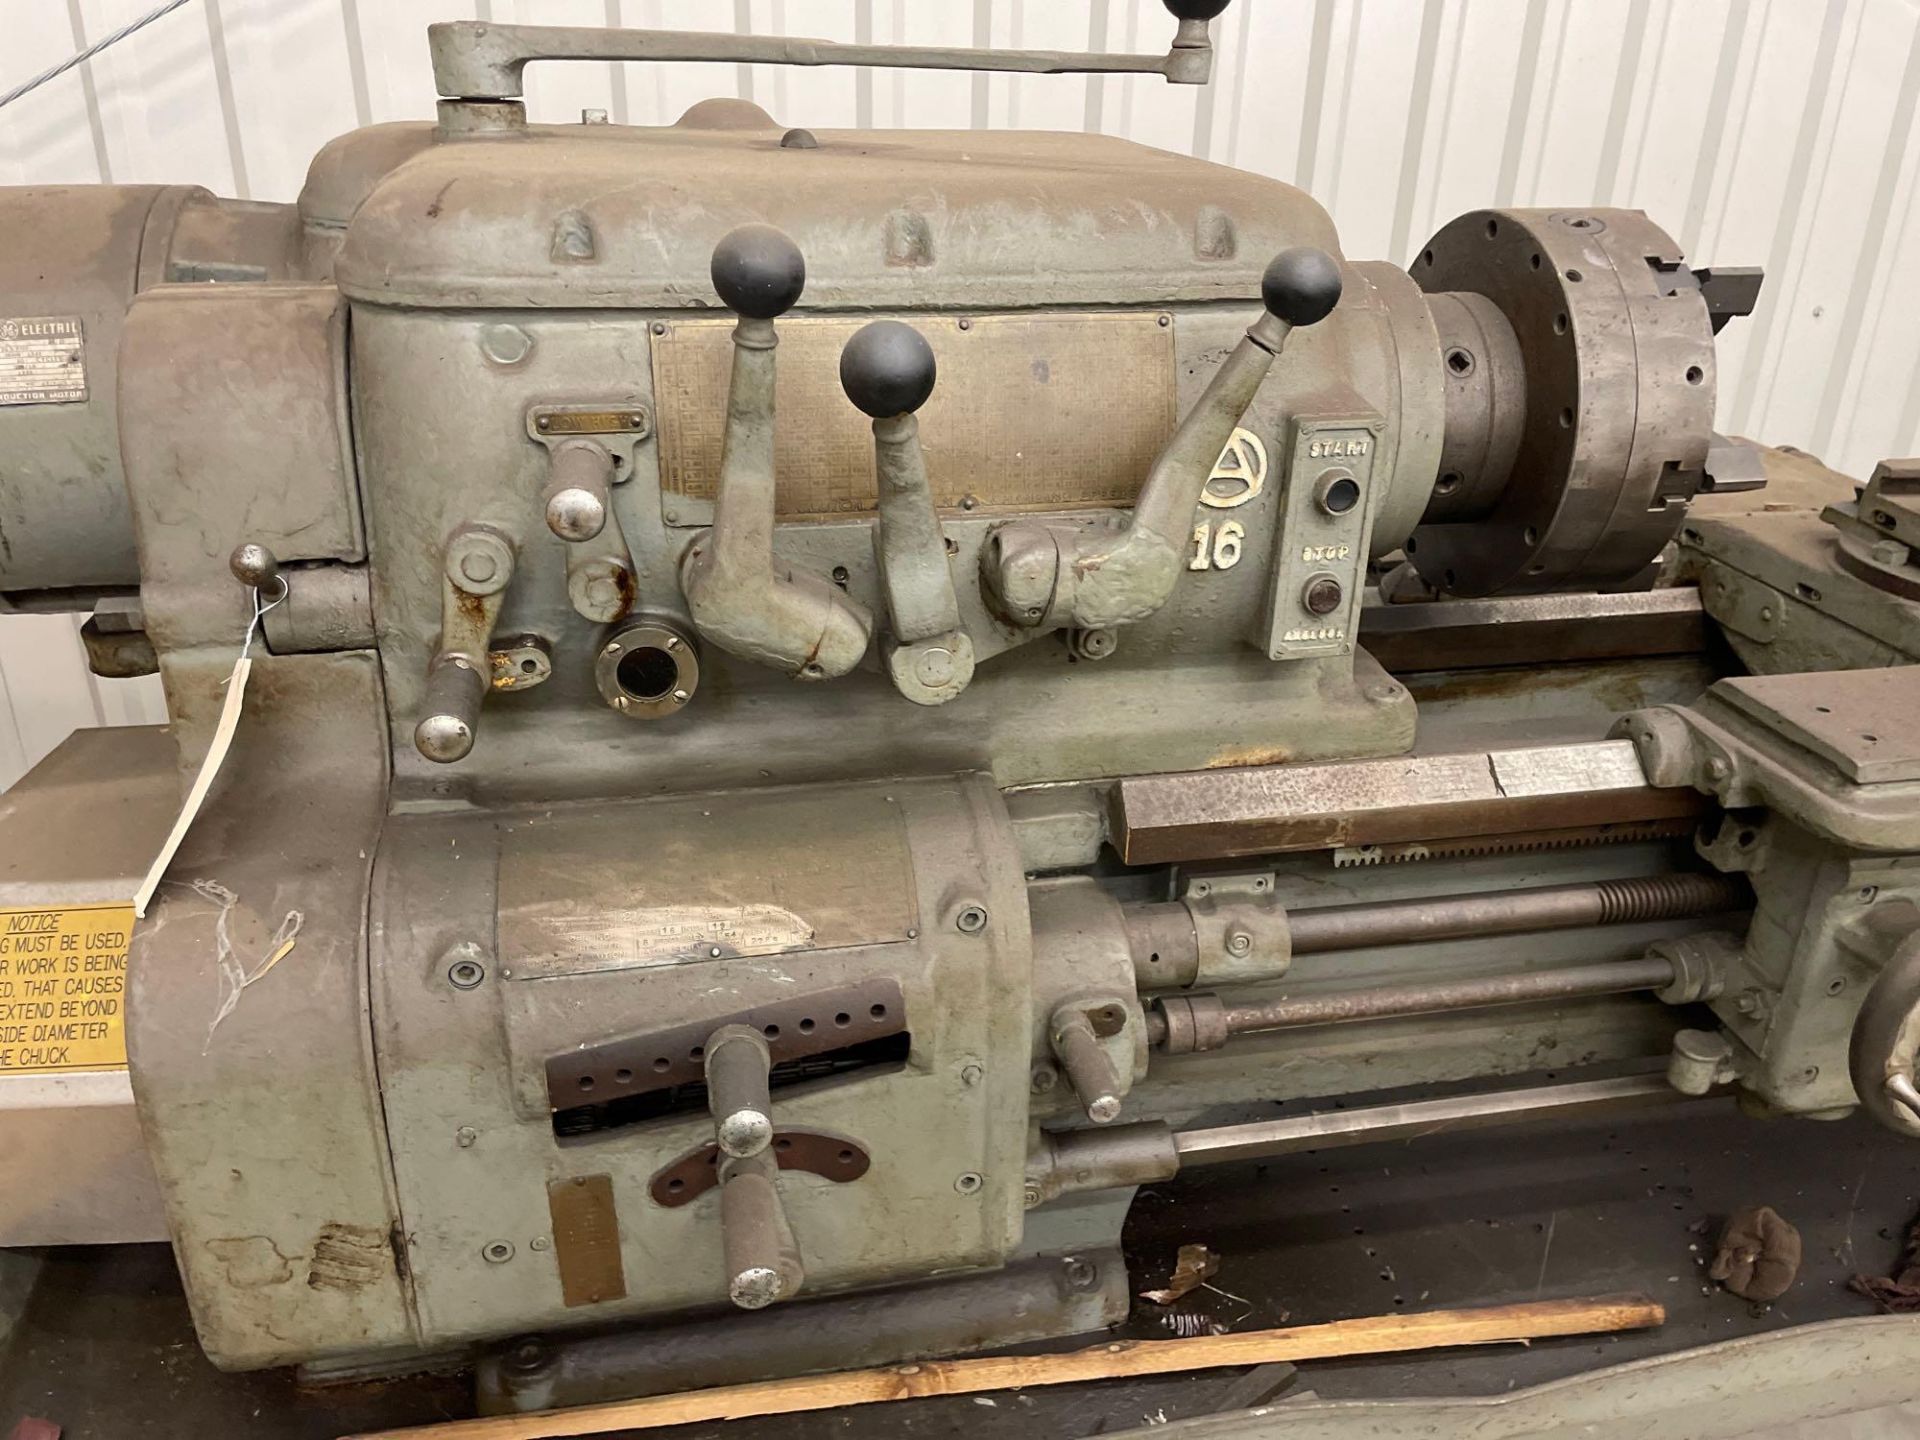 Axelson 16 Lathe, S/N 2789 - Image 3 of 7